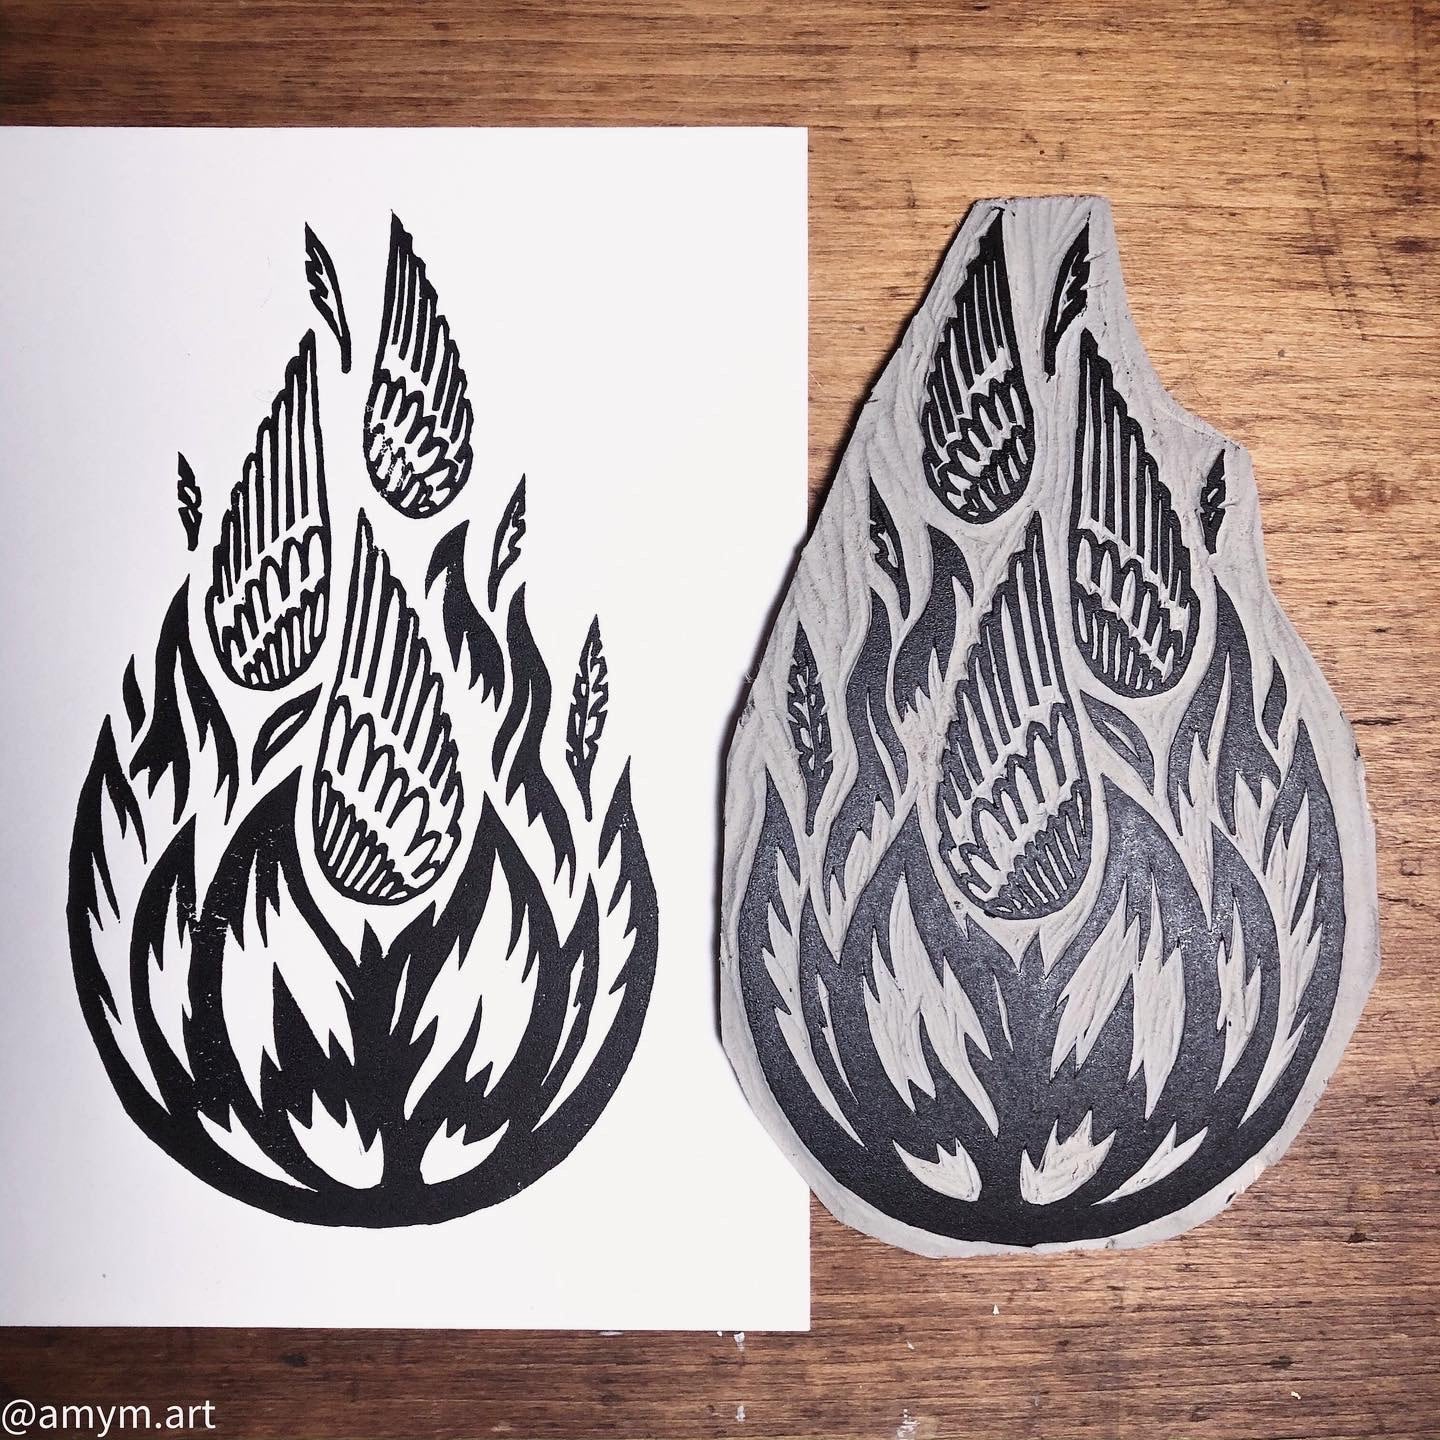 "From the Ashes" Linocut Print 5x7" | Hand Printed Black and White Block Print